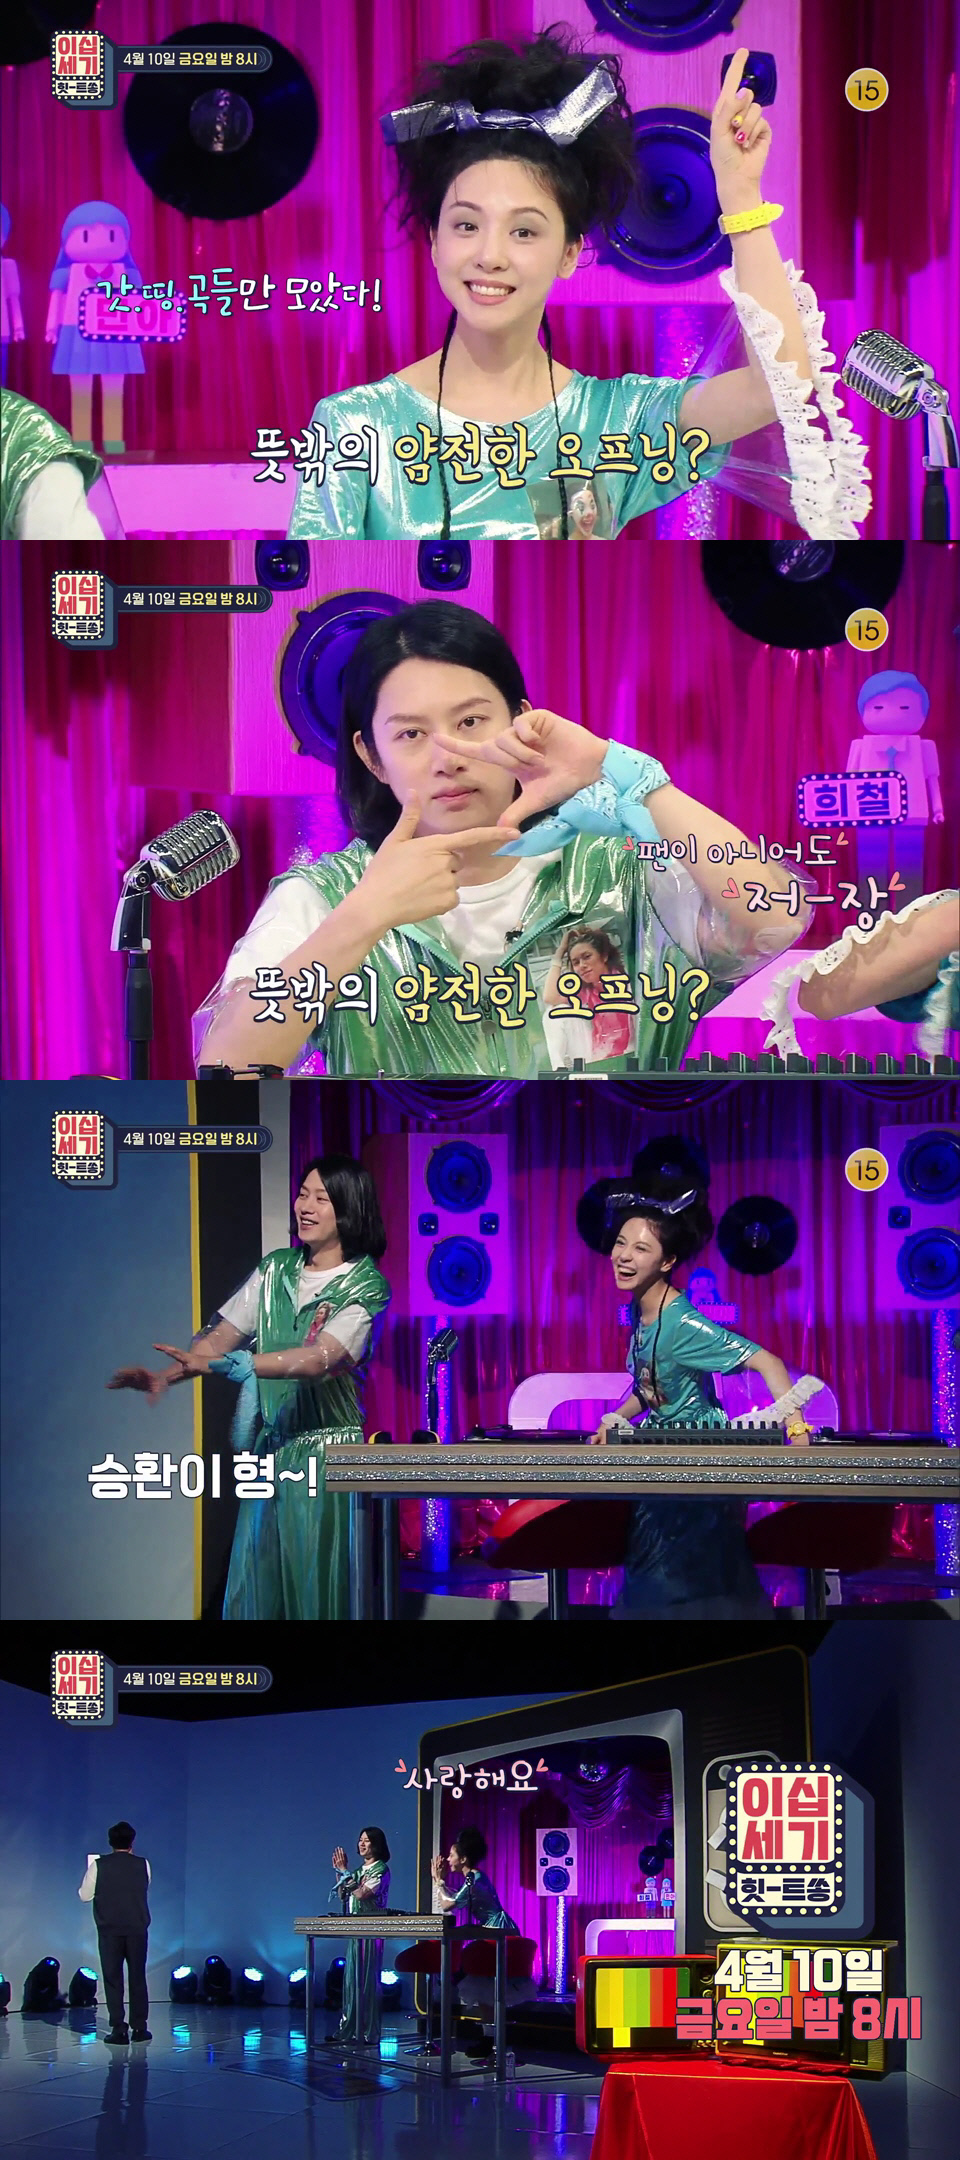 Kim Hee-chul and Kim Min-ah have introduced the fan, ah, and me that everyone recognizes, and spit out the exclamation.In the third episode of KBS Joy Twentieth Century - T, which will be broadcast on April 10, the song will be summoned under the theme of fan, ah, I (storage even if I am not a fan) - T 10.On this day, TOP10 is decorated with music that has become popular among the people who are not fans but store.From the dance song that has never been in the top spot despite its huge popularity in the past, the group song with the back story that sent demo tape to member Lee Hyun-do as a big fan of Deuce and immediately debuted was also introduced as fan, ah.In addition, the groups music, which enjoyed the popularity of the group EXO and BTS, and won the first place with the green zone I will love you and Sung Jin-woo Do not give up, was summoned to dance the two MCs, and Kim Min-ahs songs of the group that showed self-interest were also revealed.Kim Hee-chul and Kim Min-ah will add fun to the program with their own unique charm with Healthy Talker and Minran Devil.In addition, the main character of the song, which is called Summer Carroll and is still loved, appears as a guest.This guest makes the scene hot with an exciting stage and embarrasssssses MCs with honest gestures and wit.The guest will also be attracting attention by revealing the behind-the-scenes, saying, It was originally a turbo year member.MCs are arousing expectations for broadcasting, admitting that all the songs on the 10th are not strange even if they are the first place.The third episode of Twenty Century - Tt will be broadcast on KBS Joy at 8 pm on Friday, April 10.